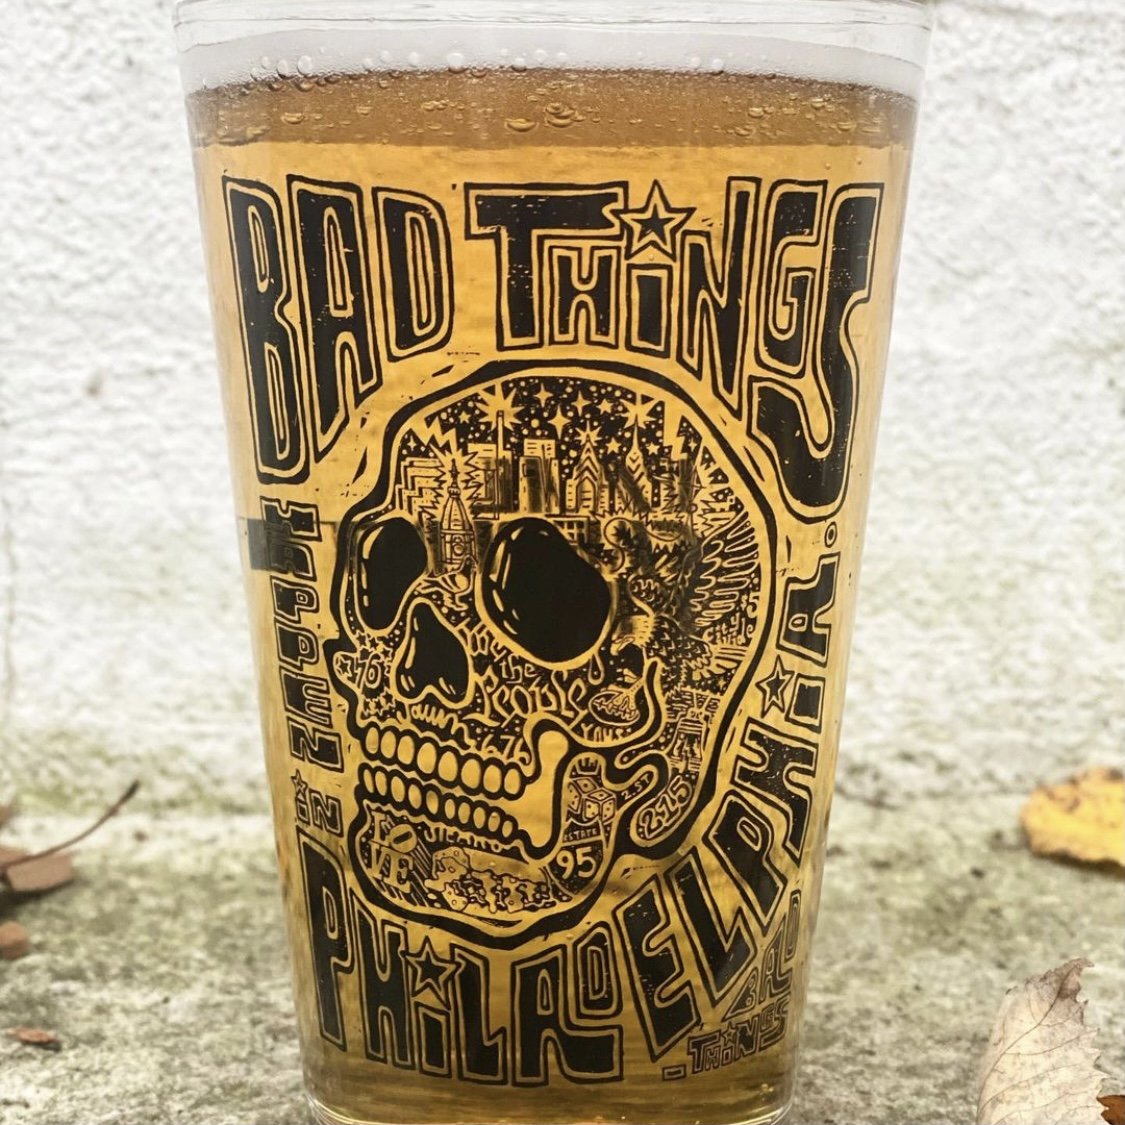 A Philly Pint Glass filled with a golden-colored beverage featuring a graphic with the text "bad things Philadelphia" and skyline imagery.